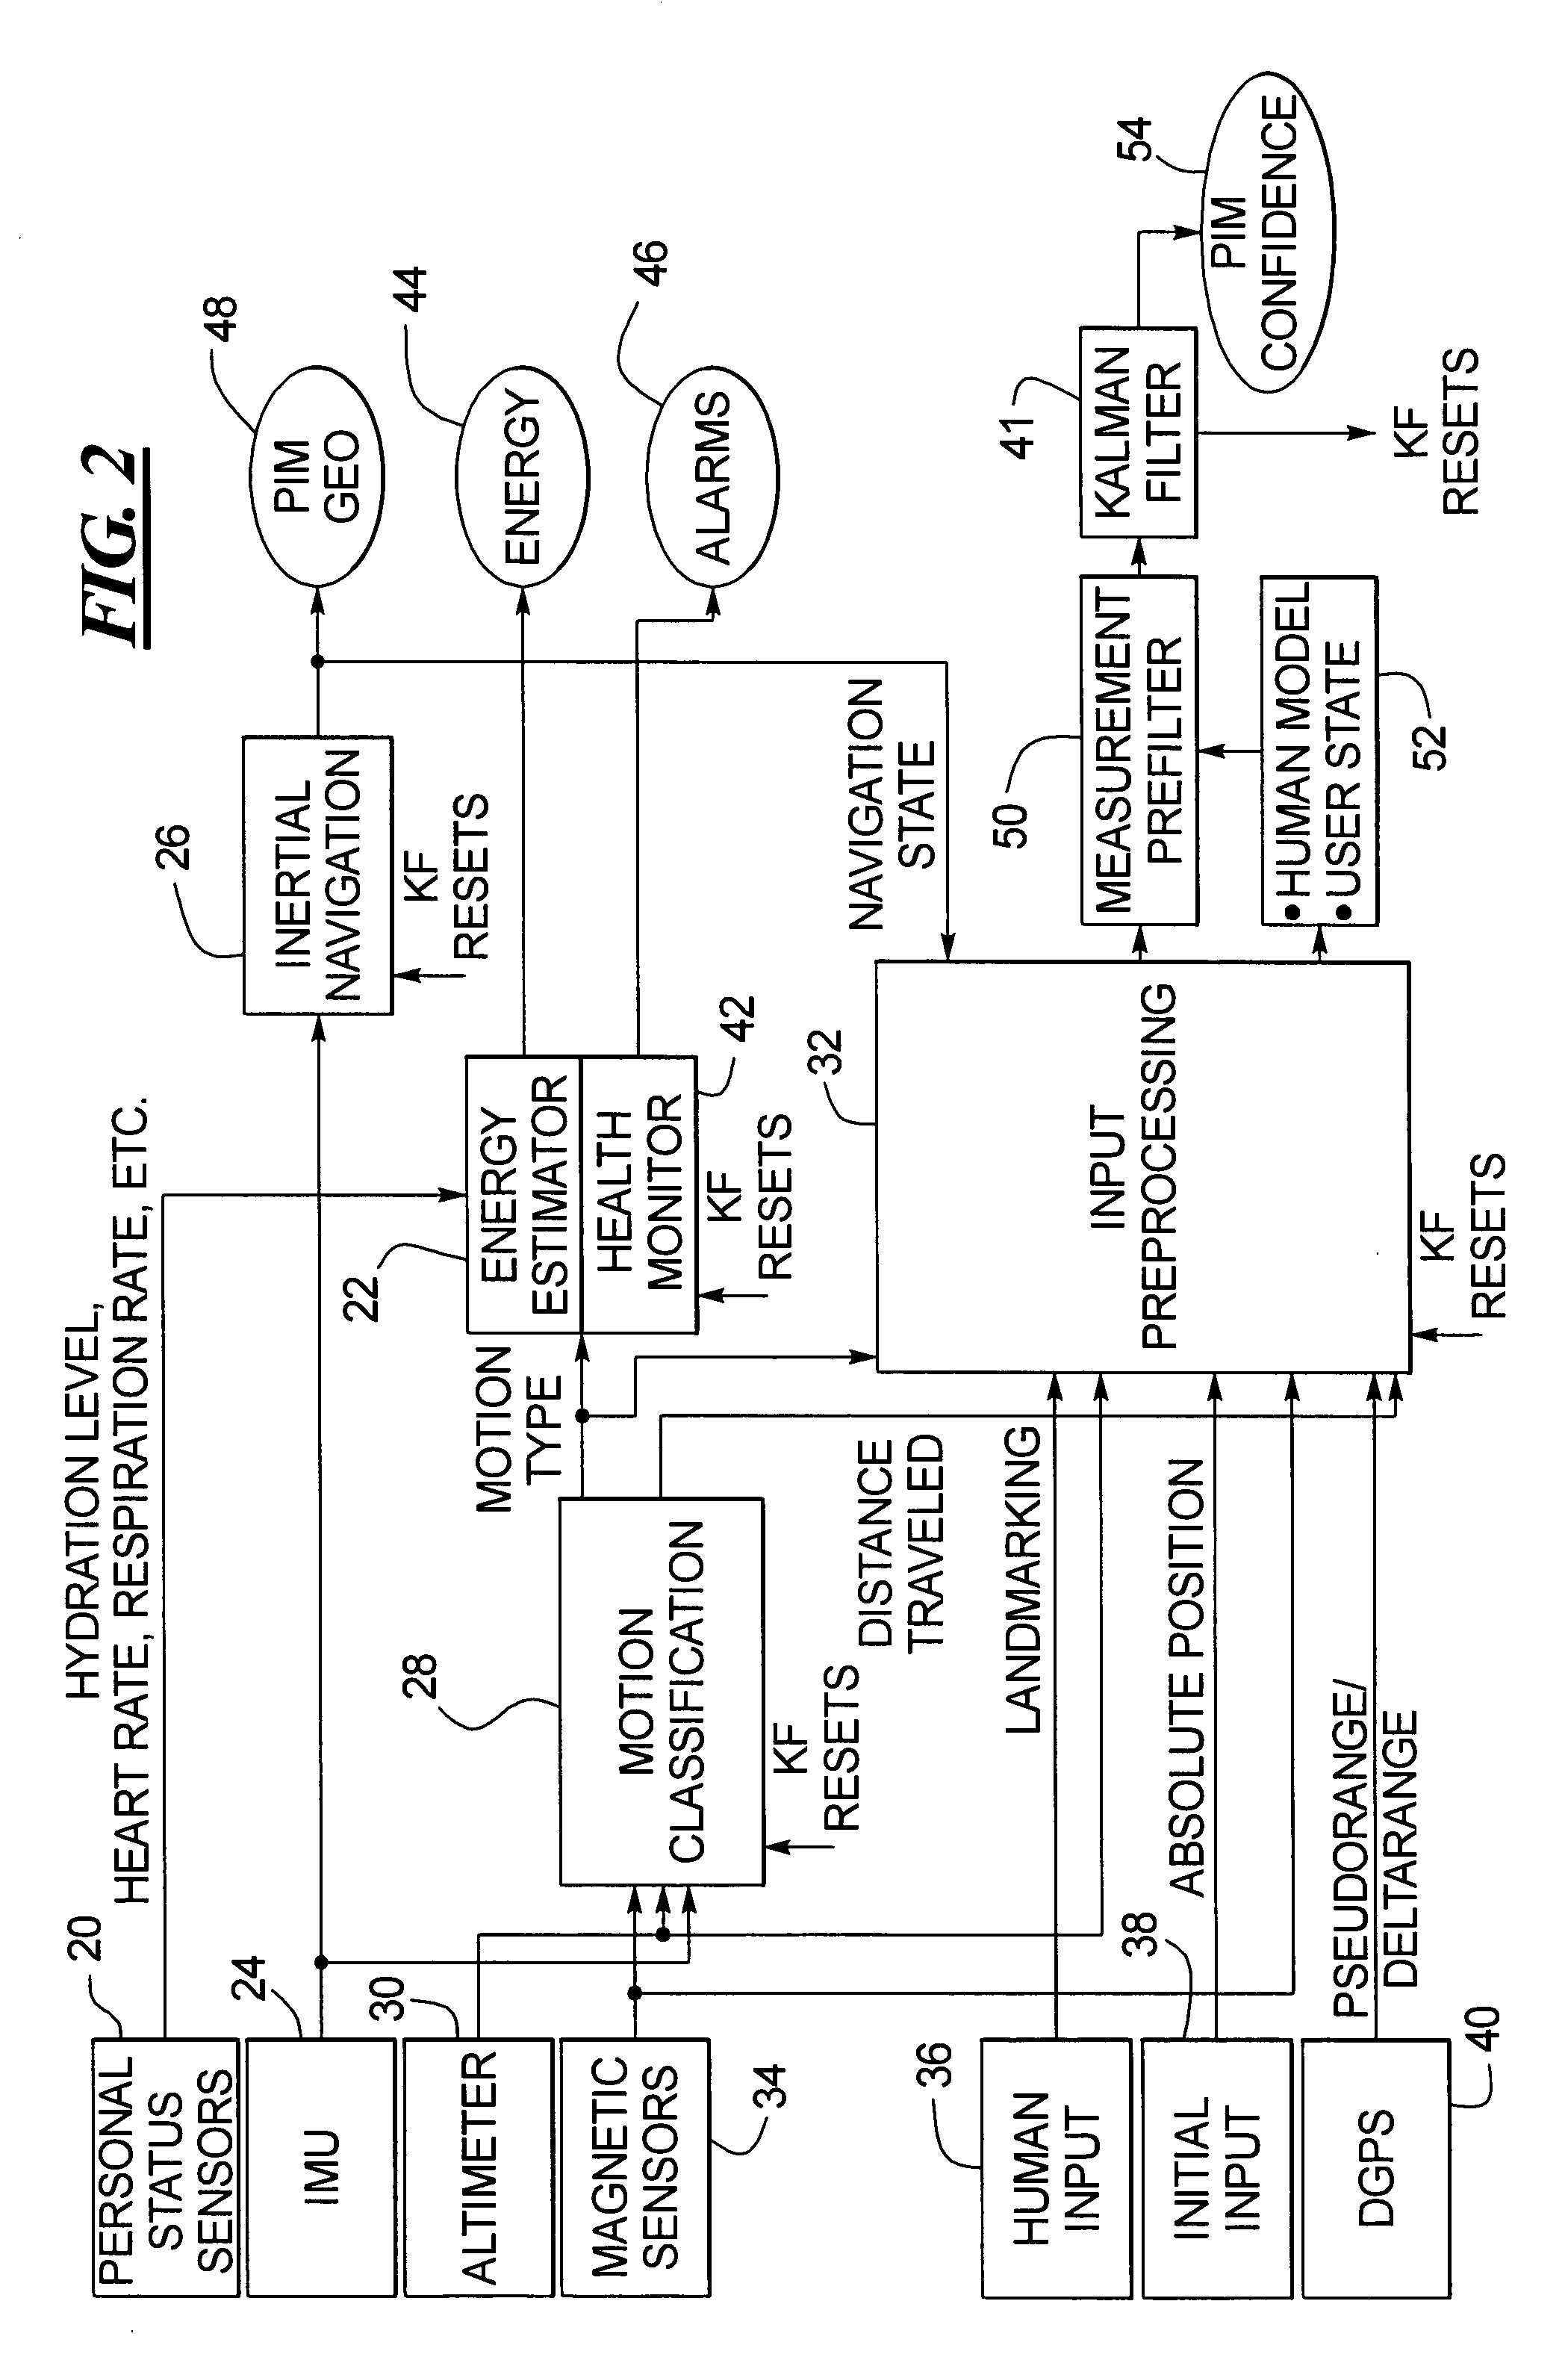 Human motion identification and measurement system and method